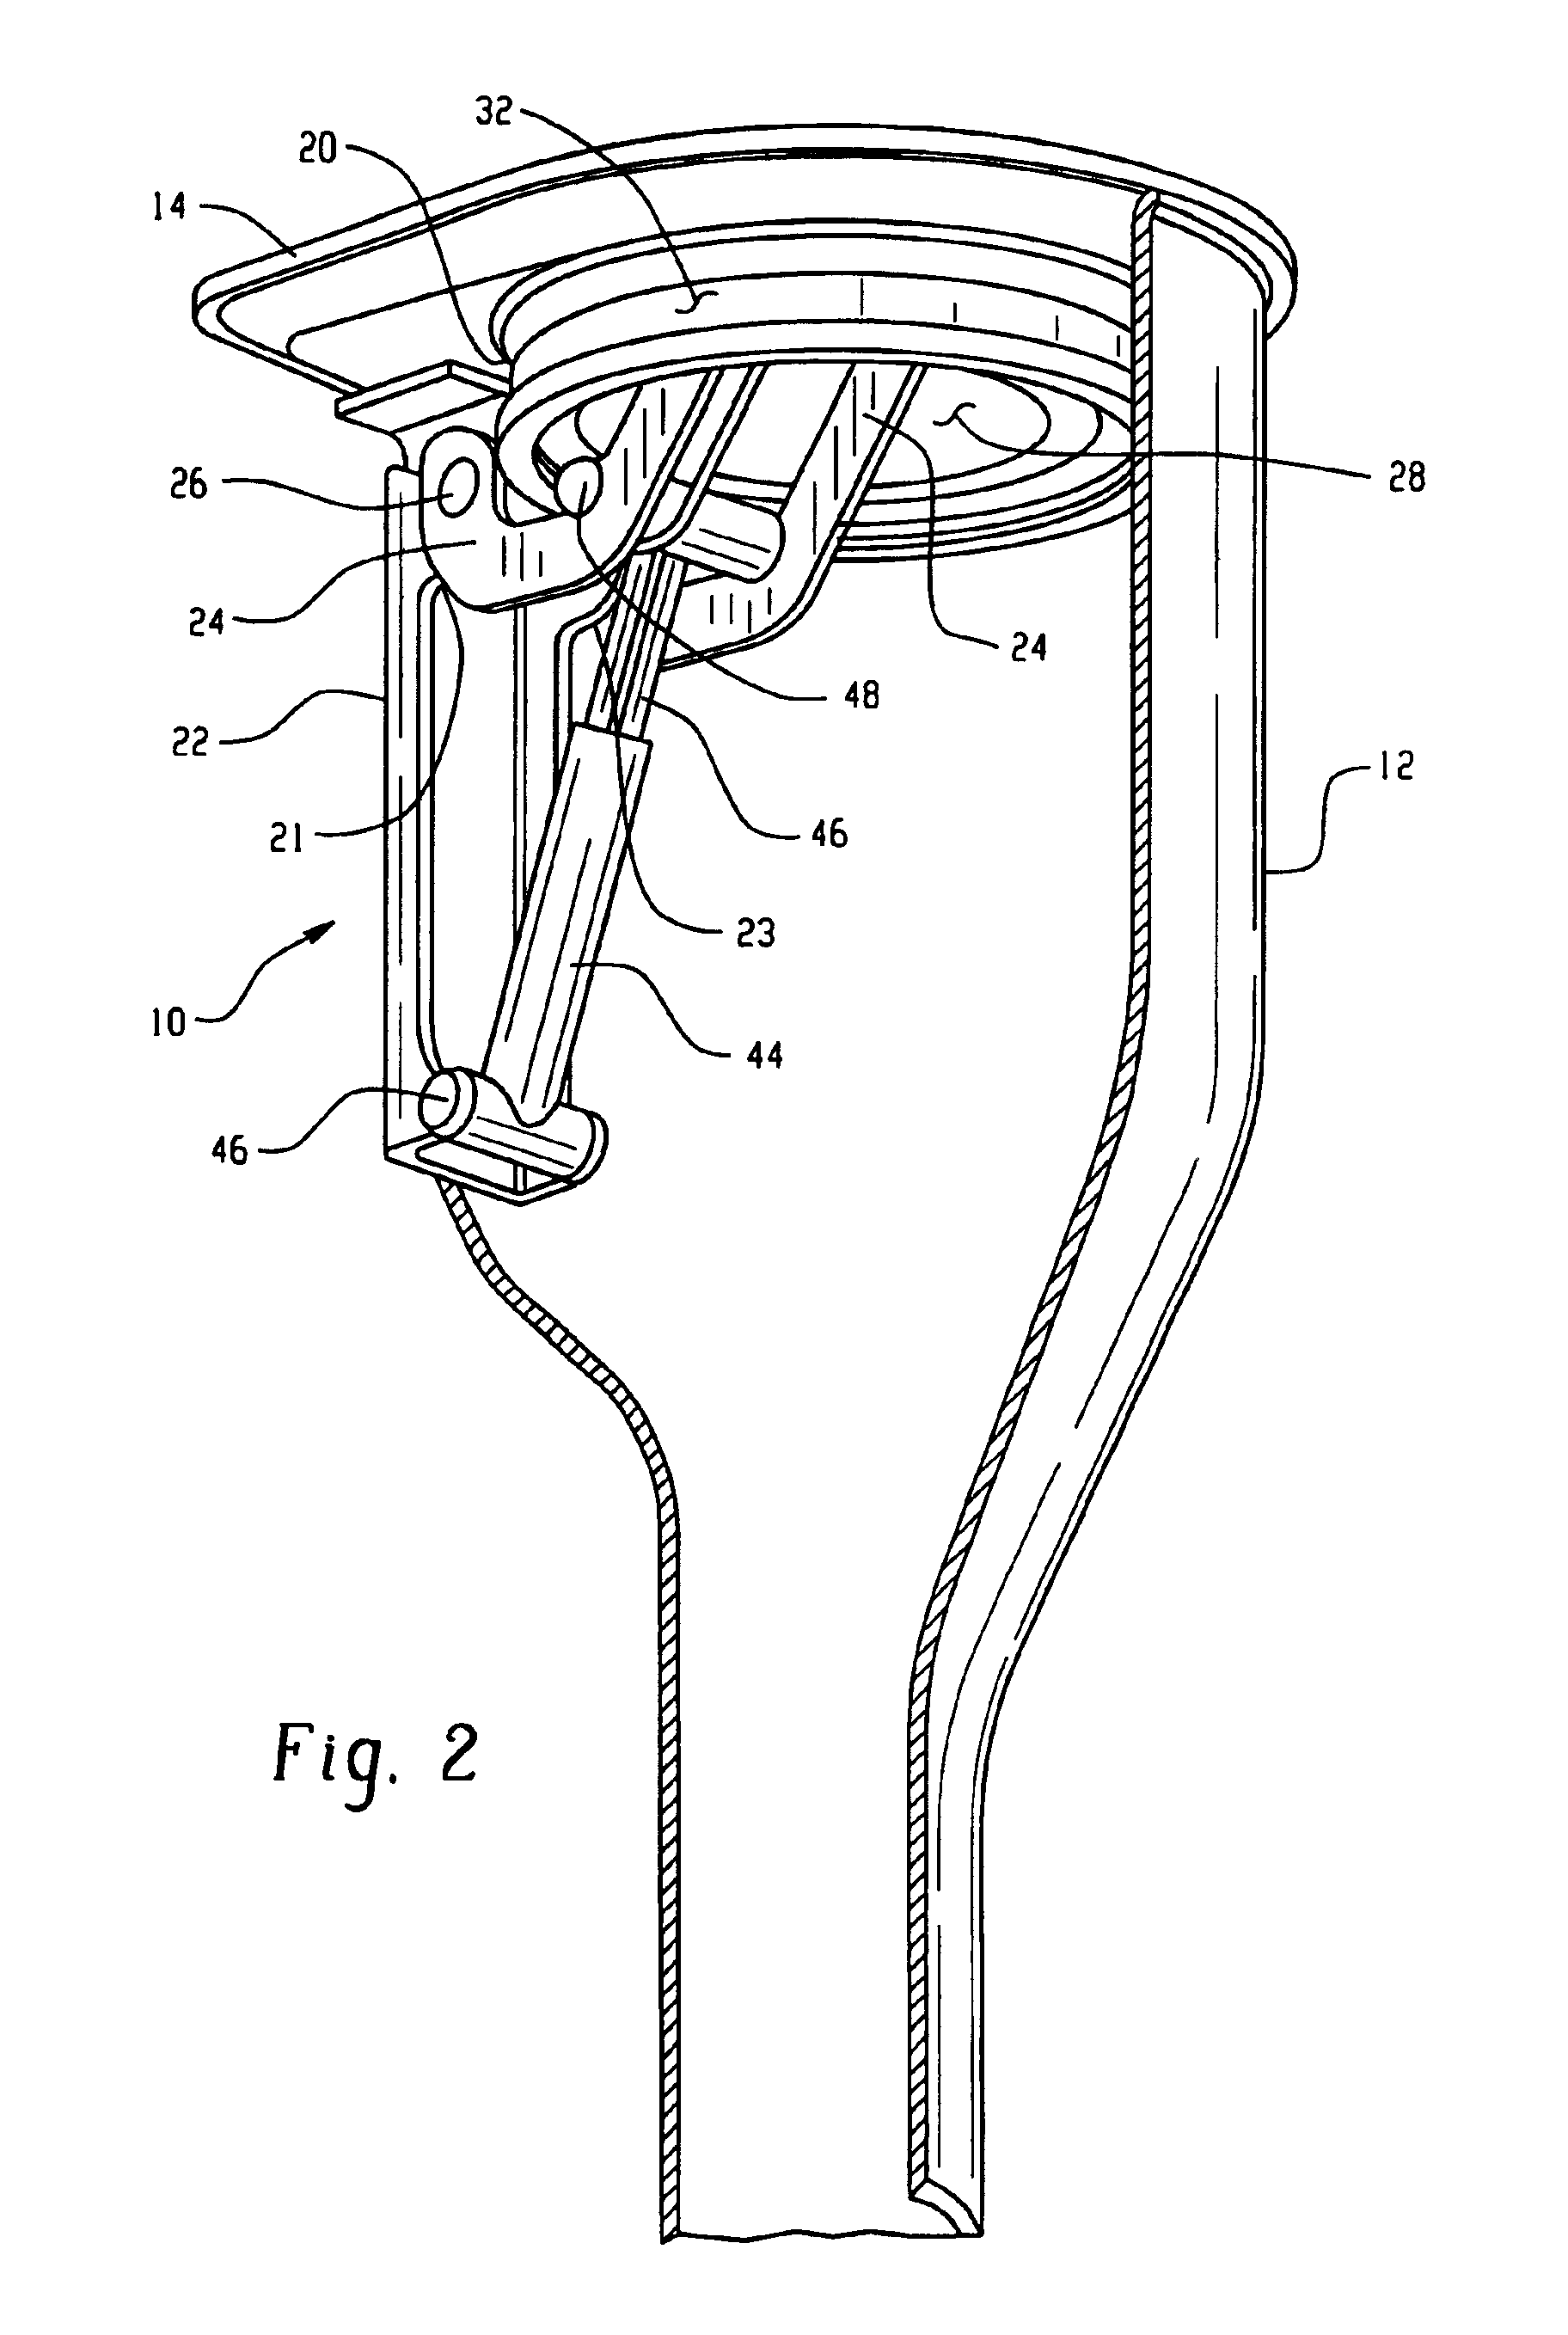 Method and arrangement for sealing a capless fuel tank filler tube